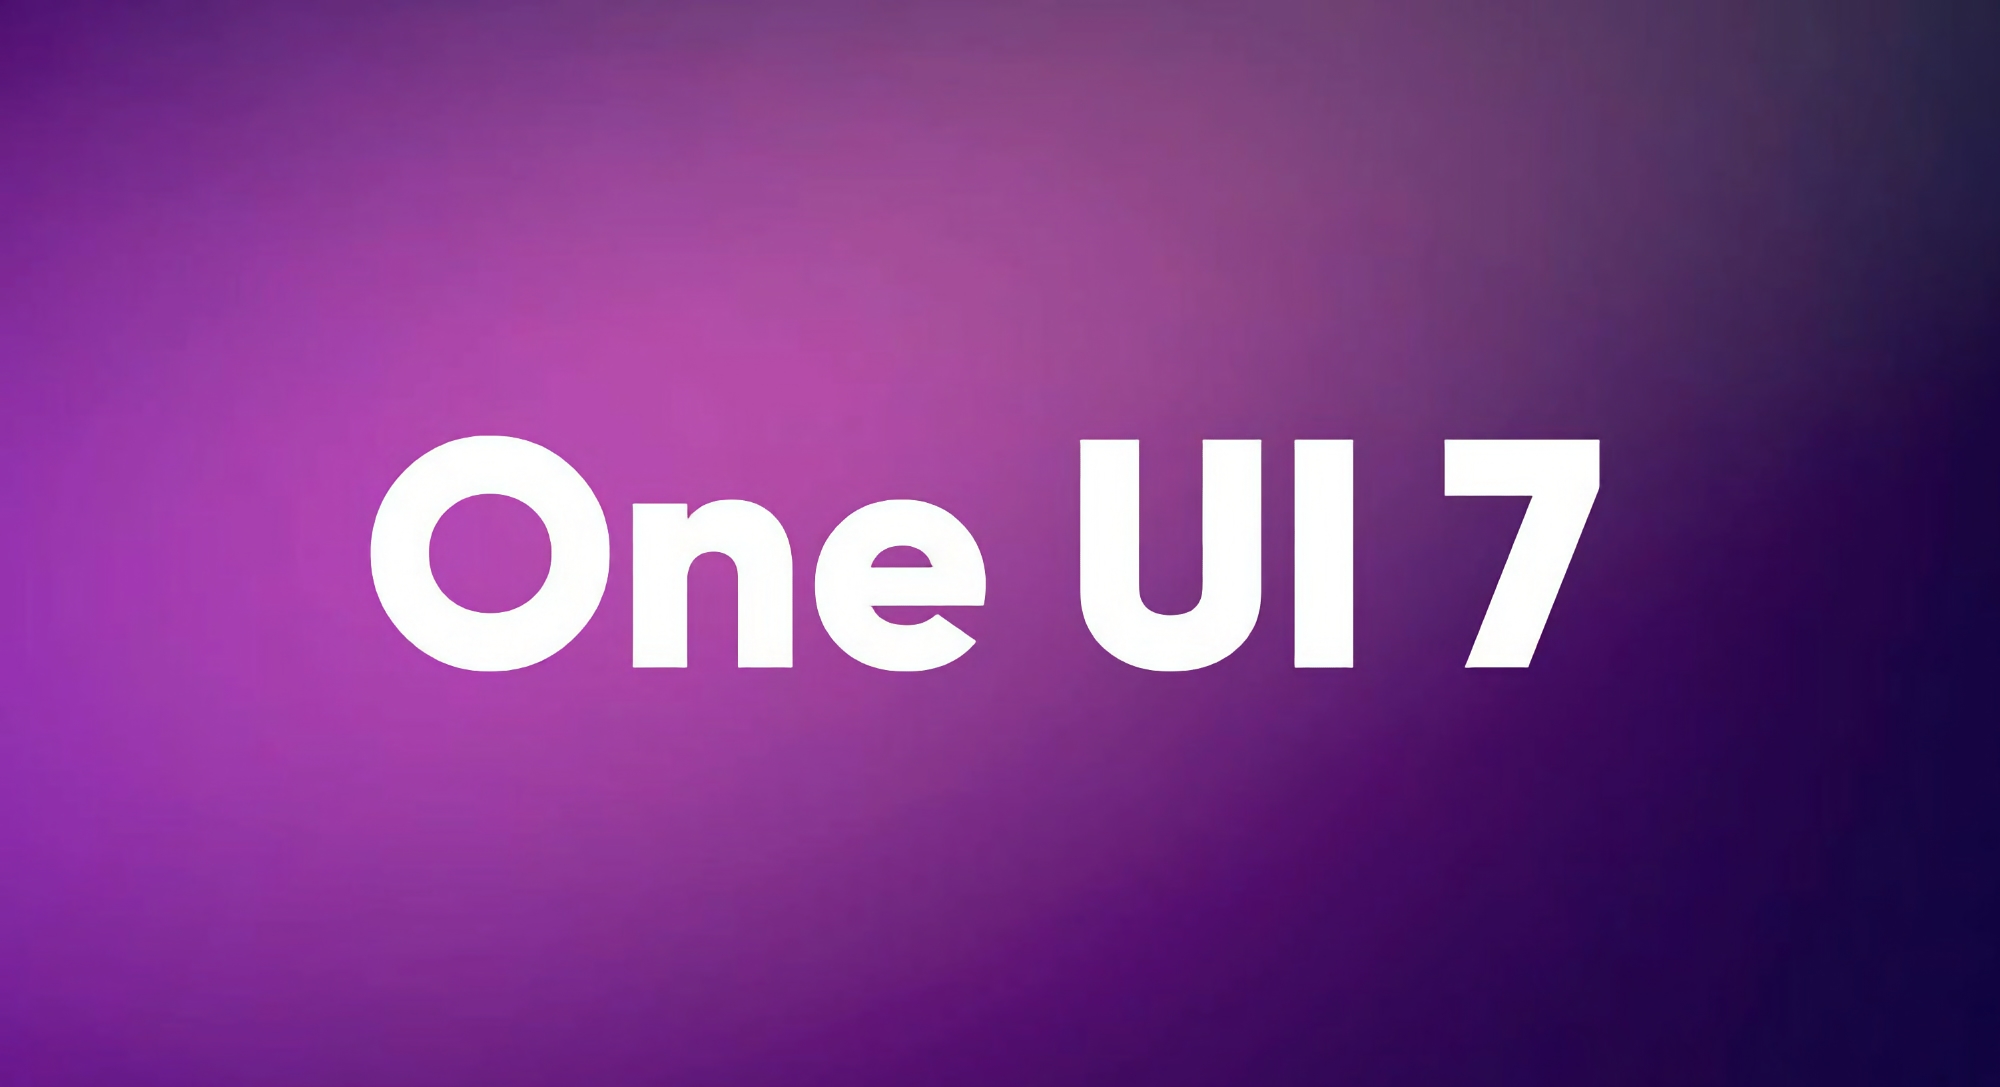 Design and features like iOS 18 and HyperOS: details about the One UI 7 shell have surfaced online